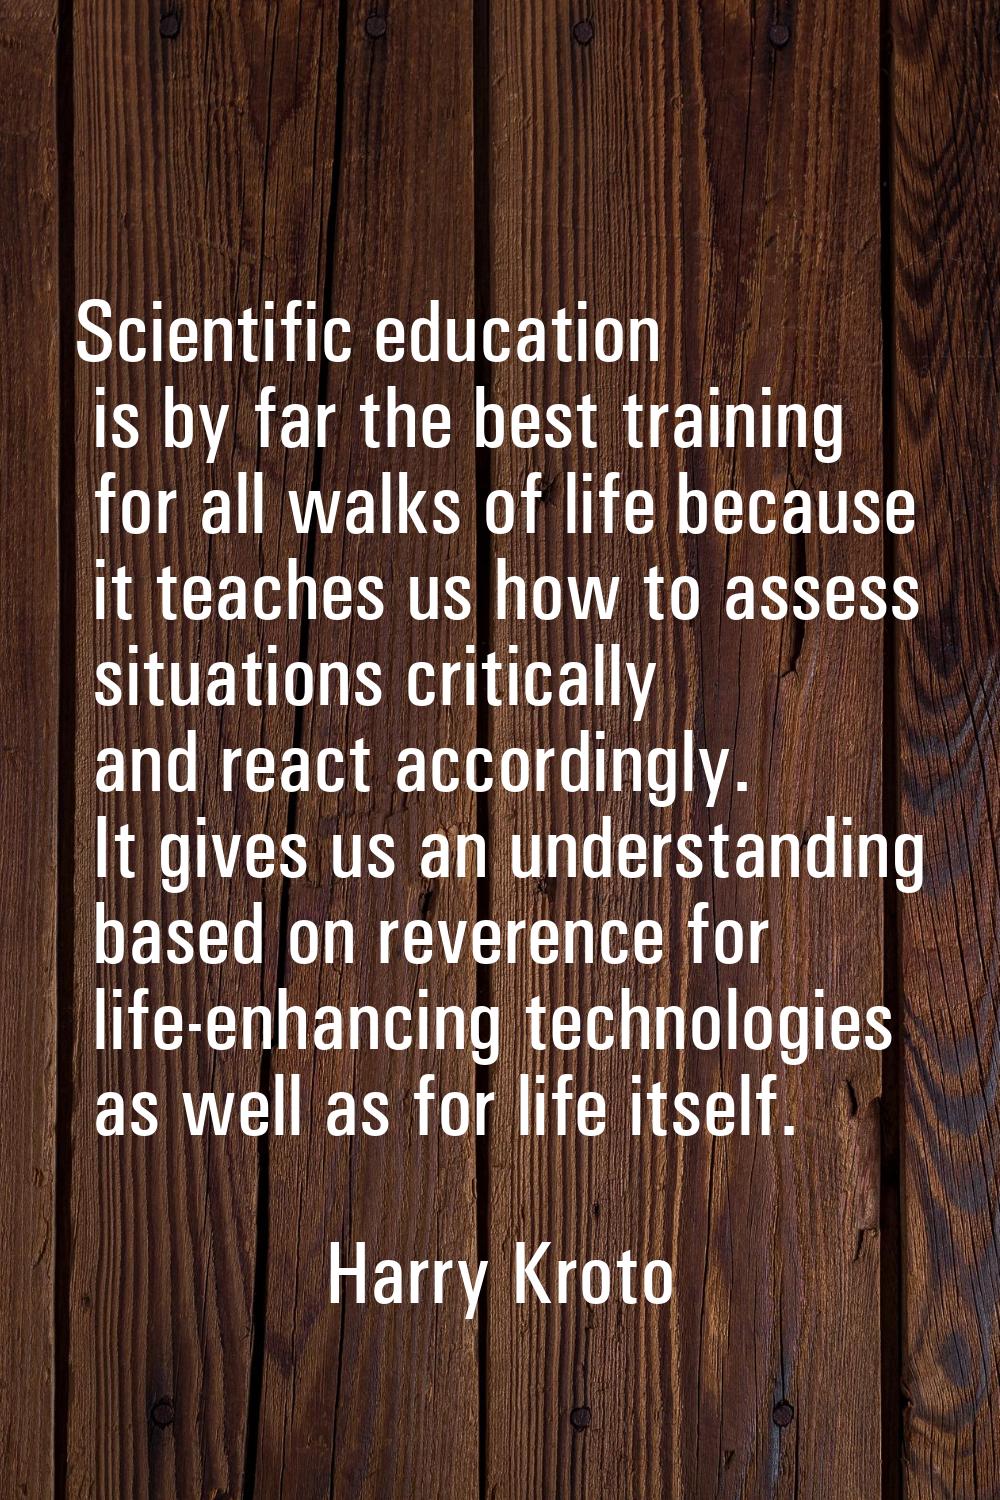 Scientific education is by far the best training for all walks of life because it teaches us how to